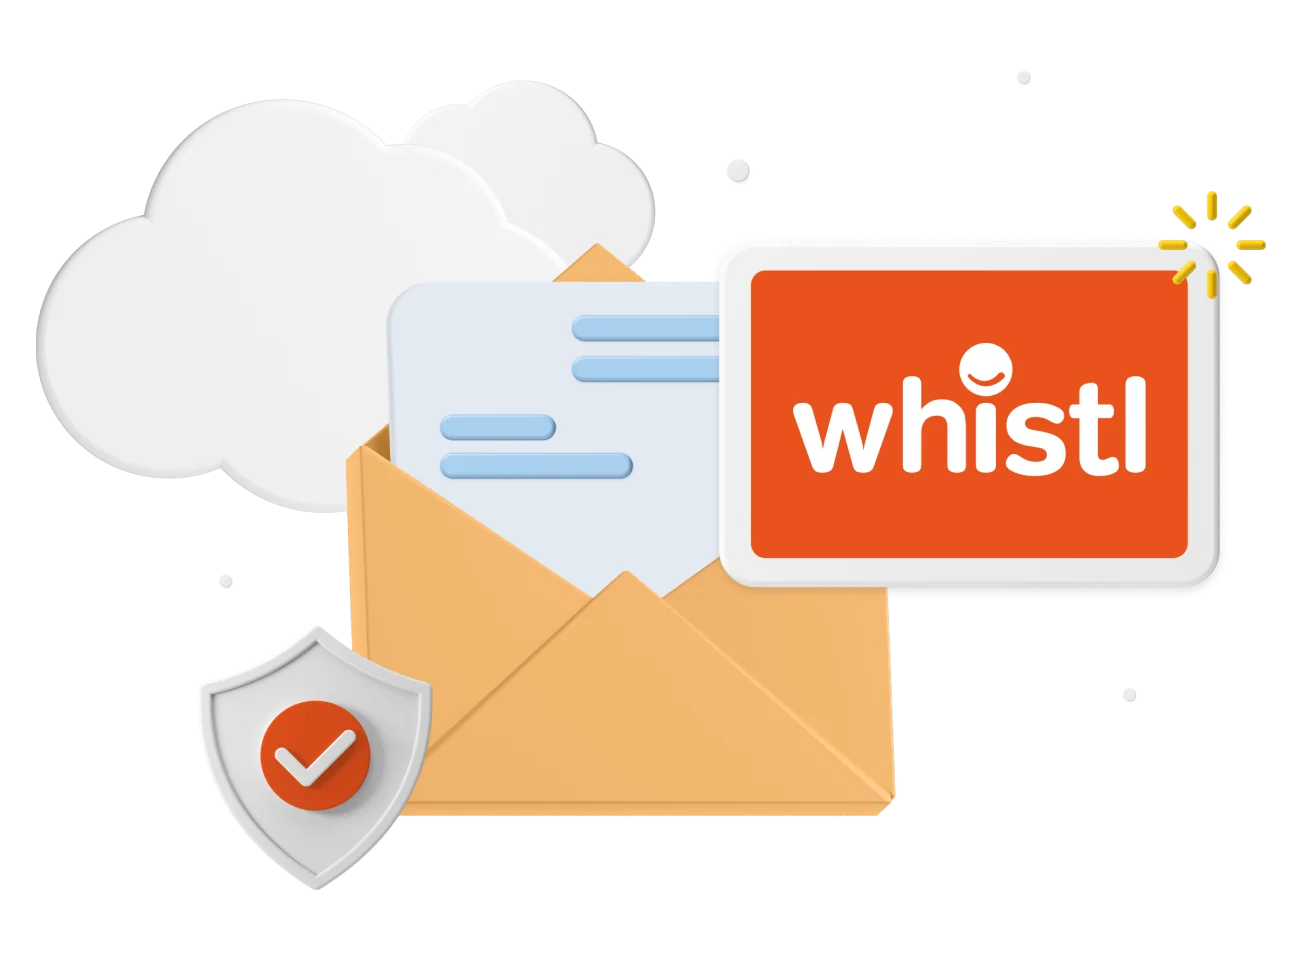 Open letter with Whistl logo and animated clouds